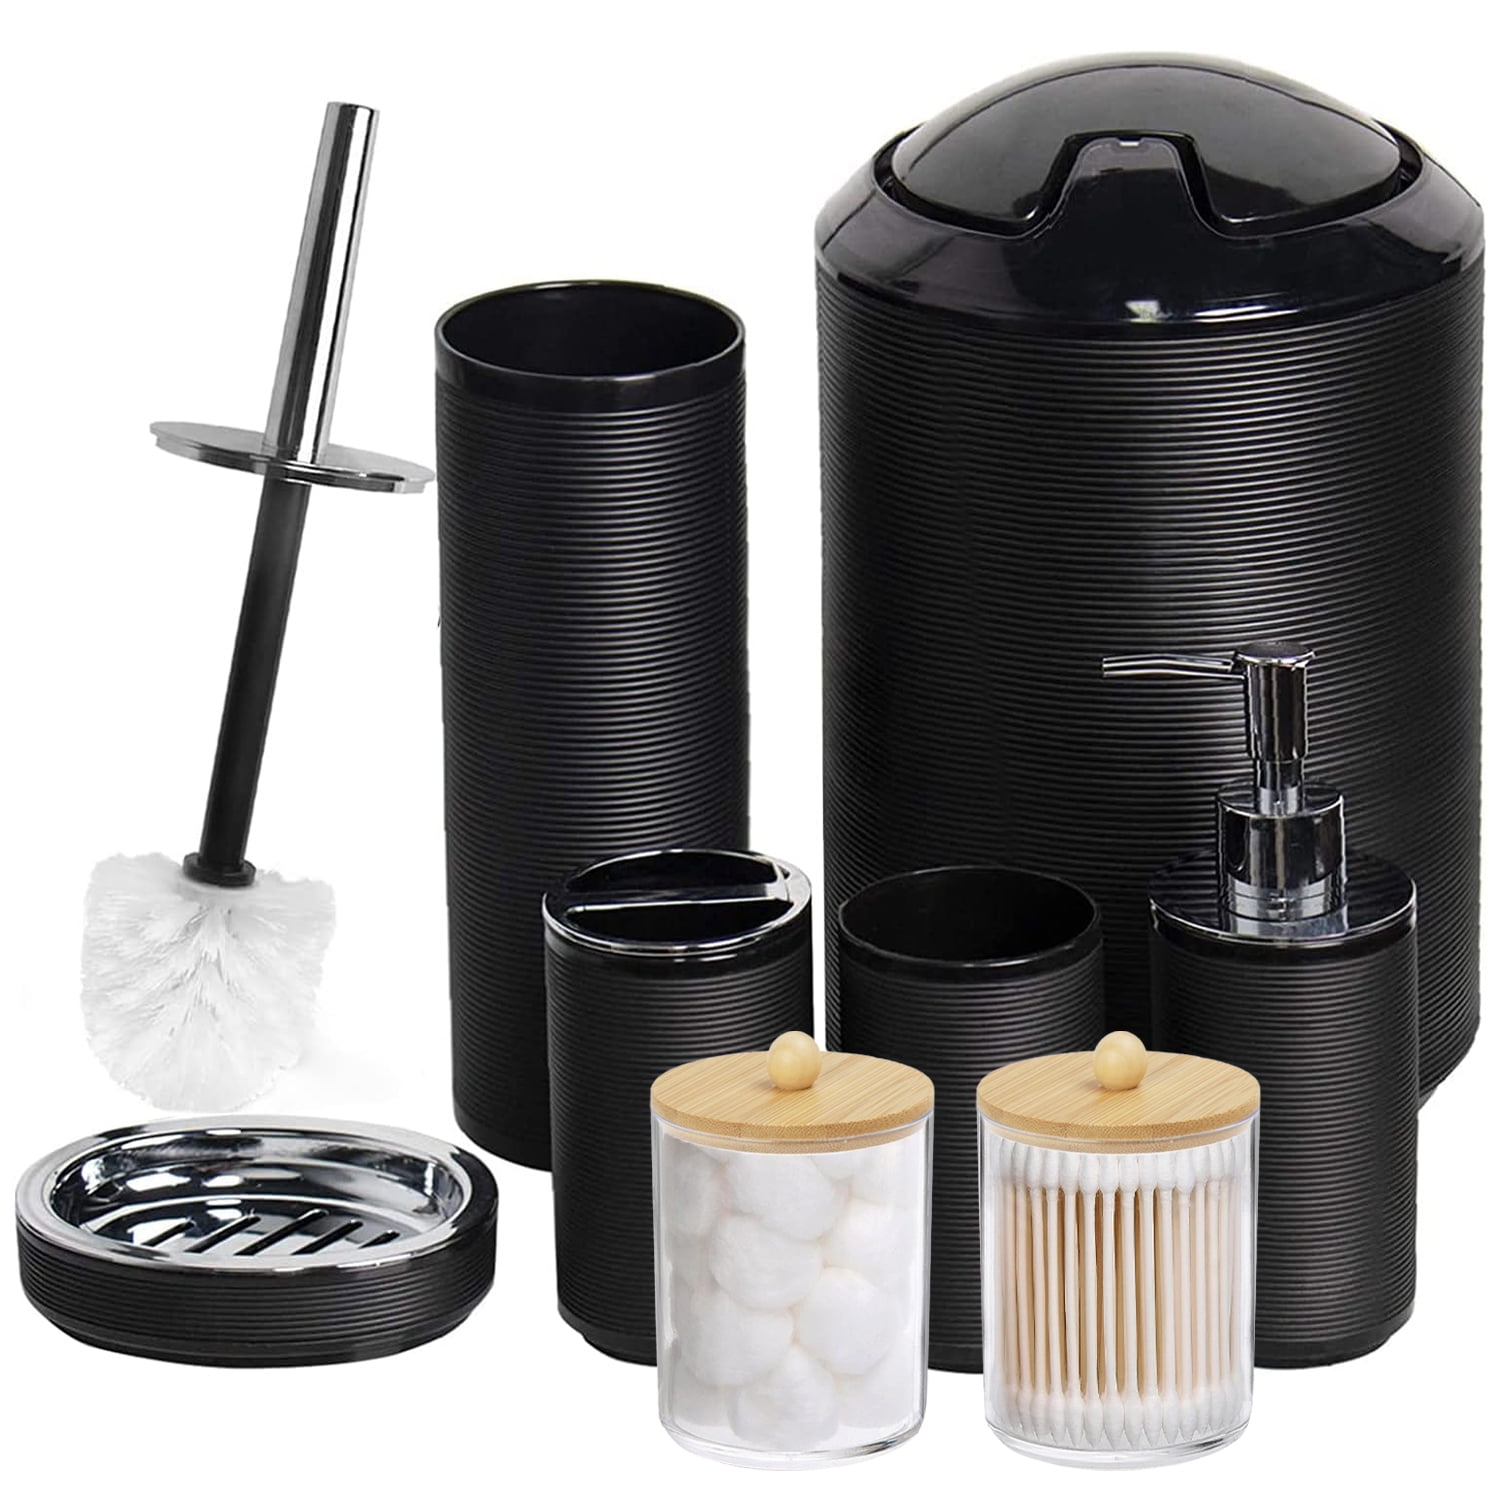 Black Set of Accessories for Big Bathroom, Includes: Shower Shelf, Toilet  Paper Stand With Brush Tray, 2 Hooks, Modern Bathroom Accessories 